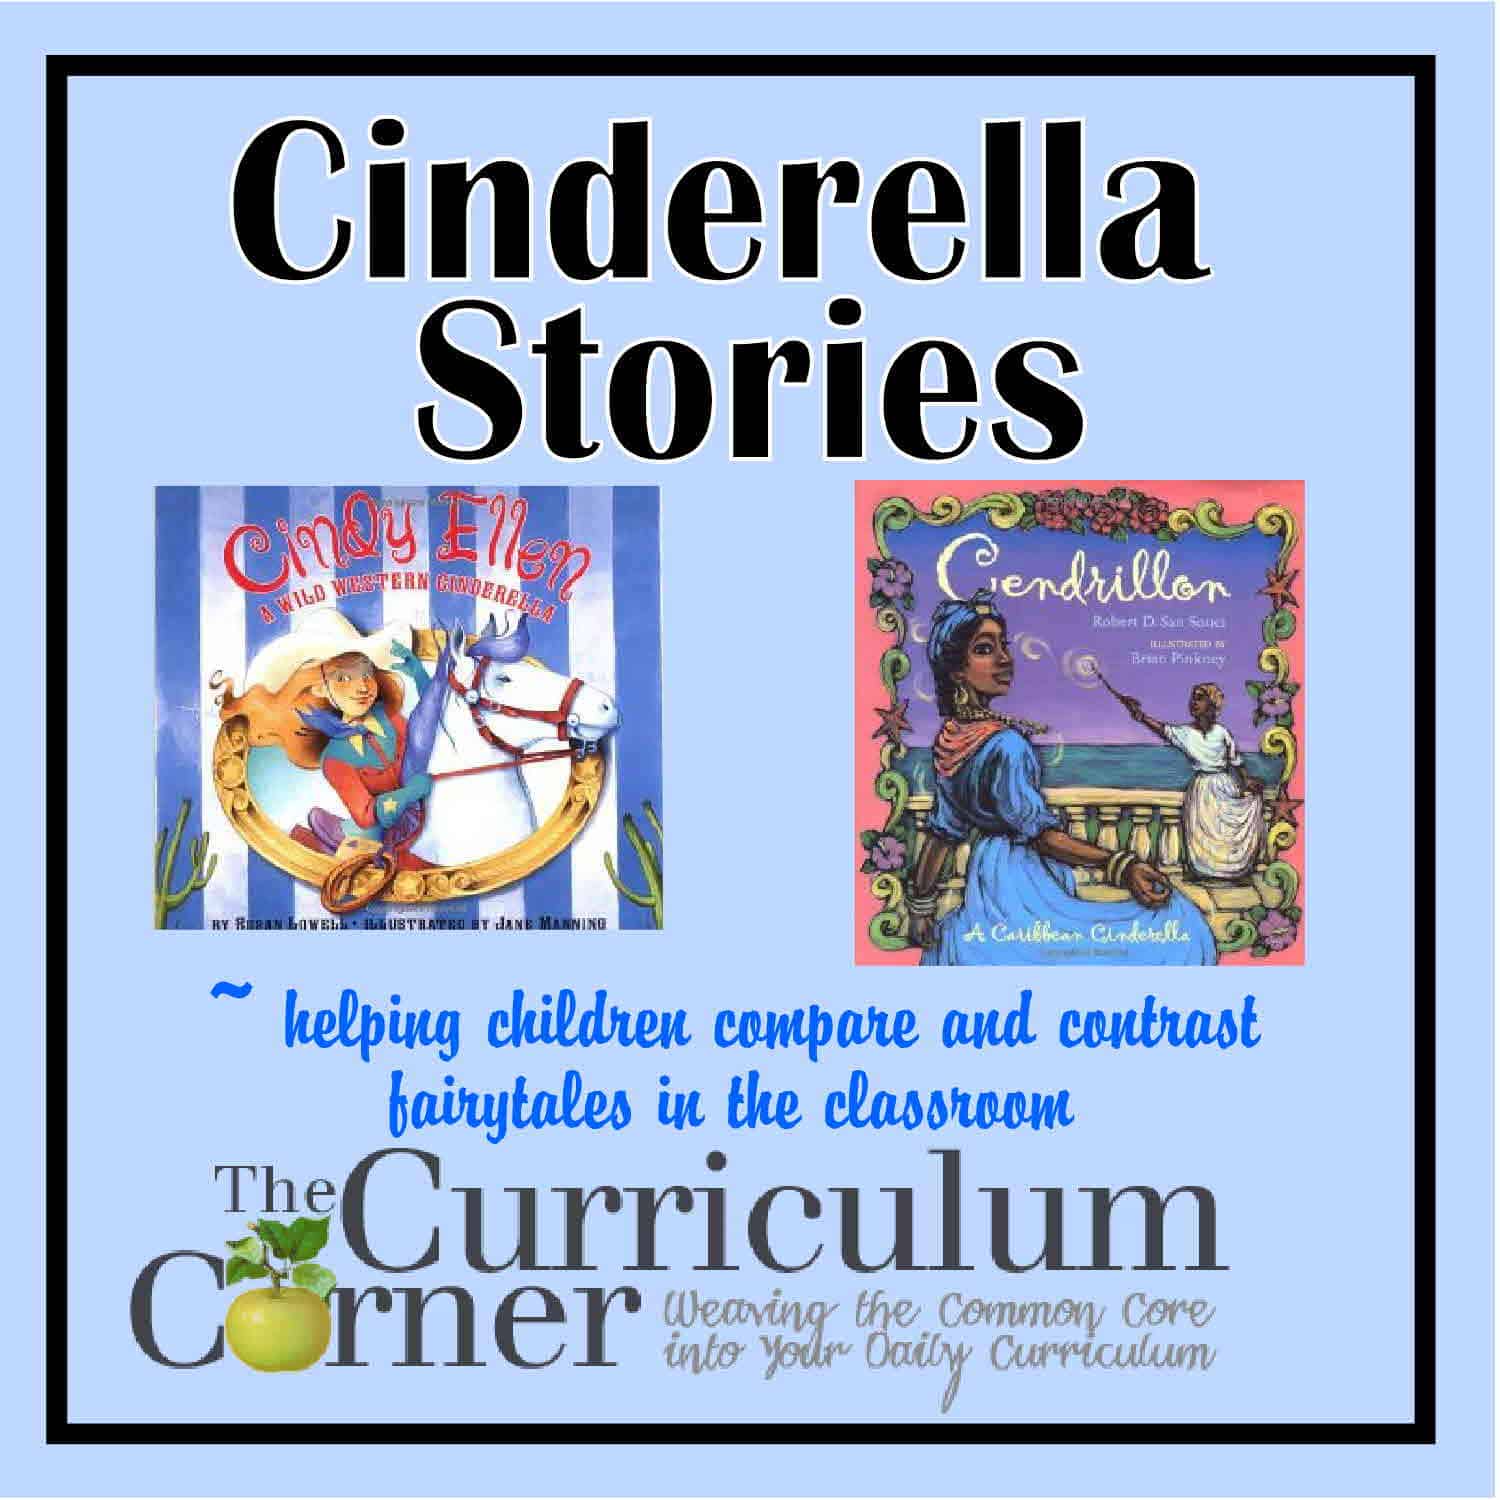 book review on cinderella story